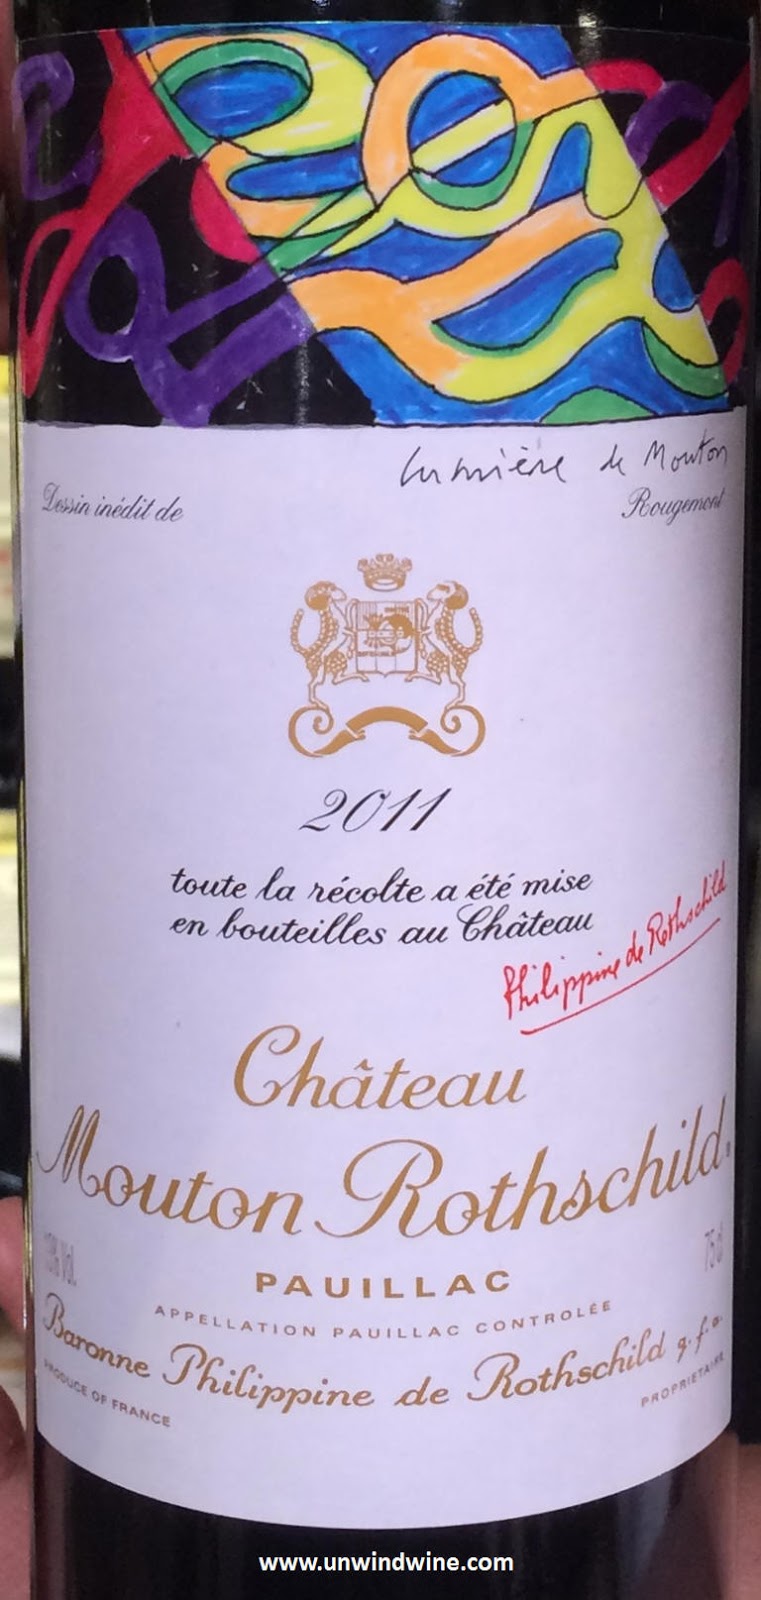 Château Mouton Rothschild Artist Labels Are As Collectible As The Wine -  Quill & Pad